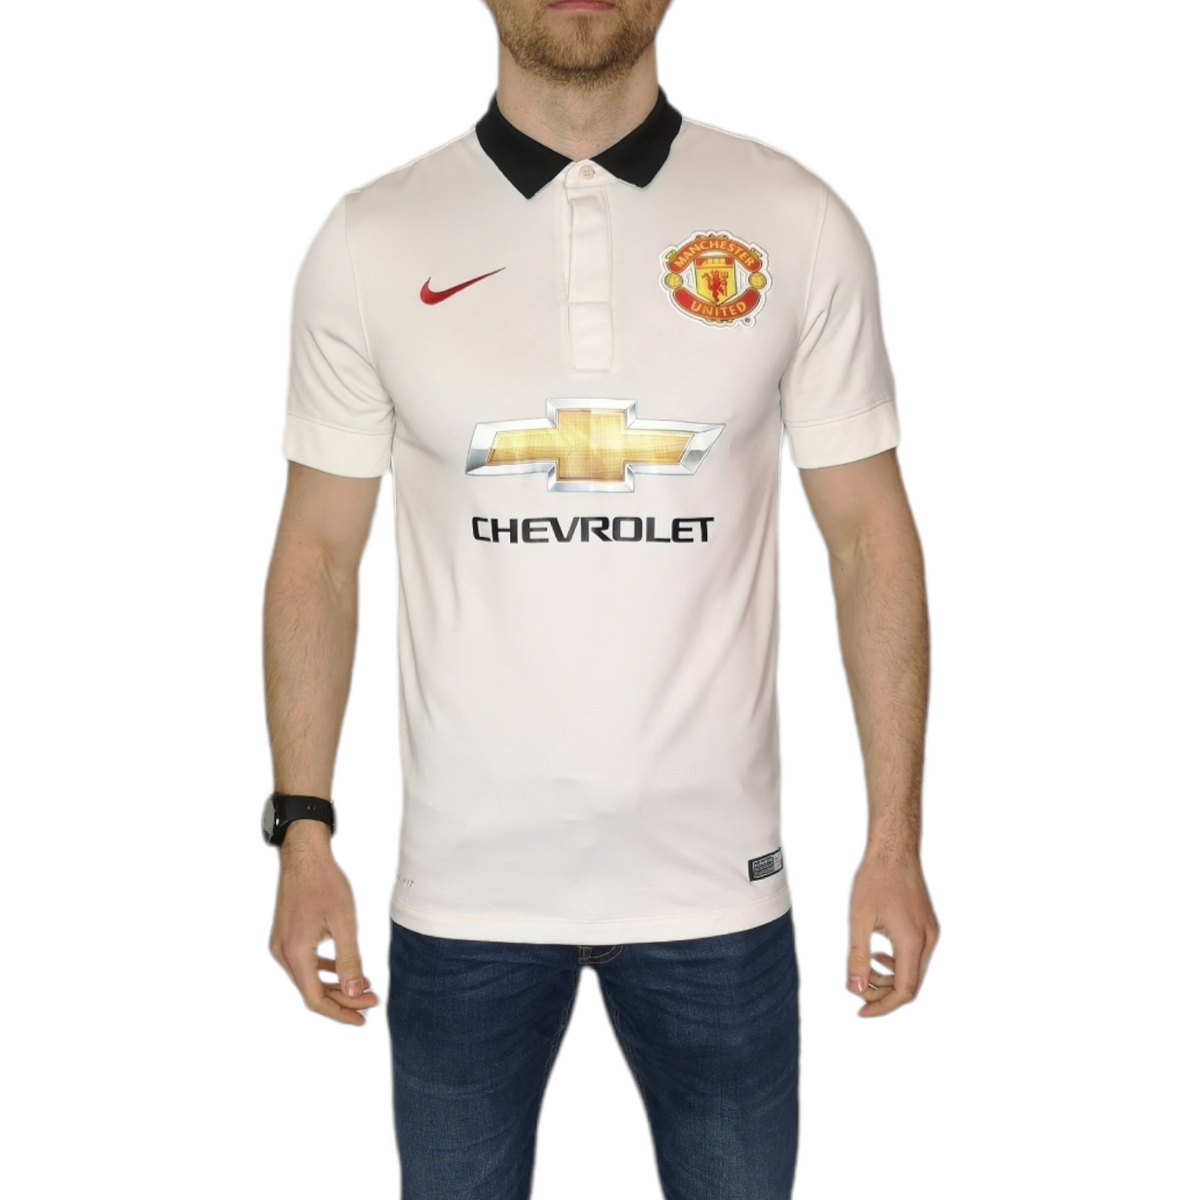 14/15 Nike Manchester United Away Shirt - Size Small